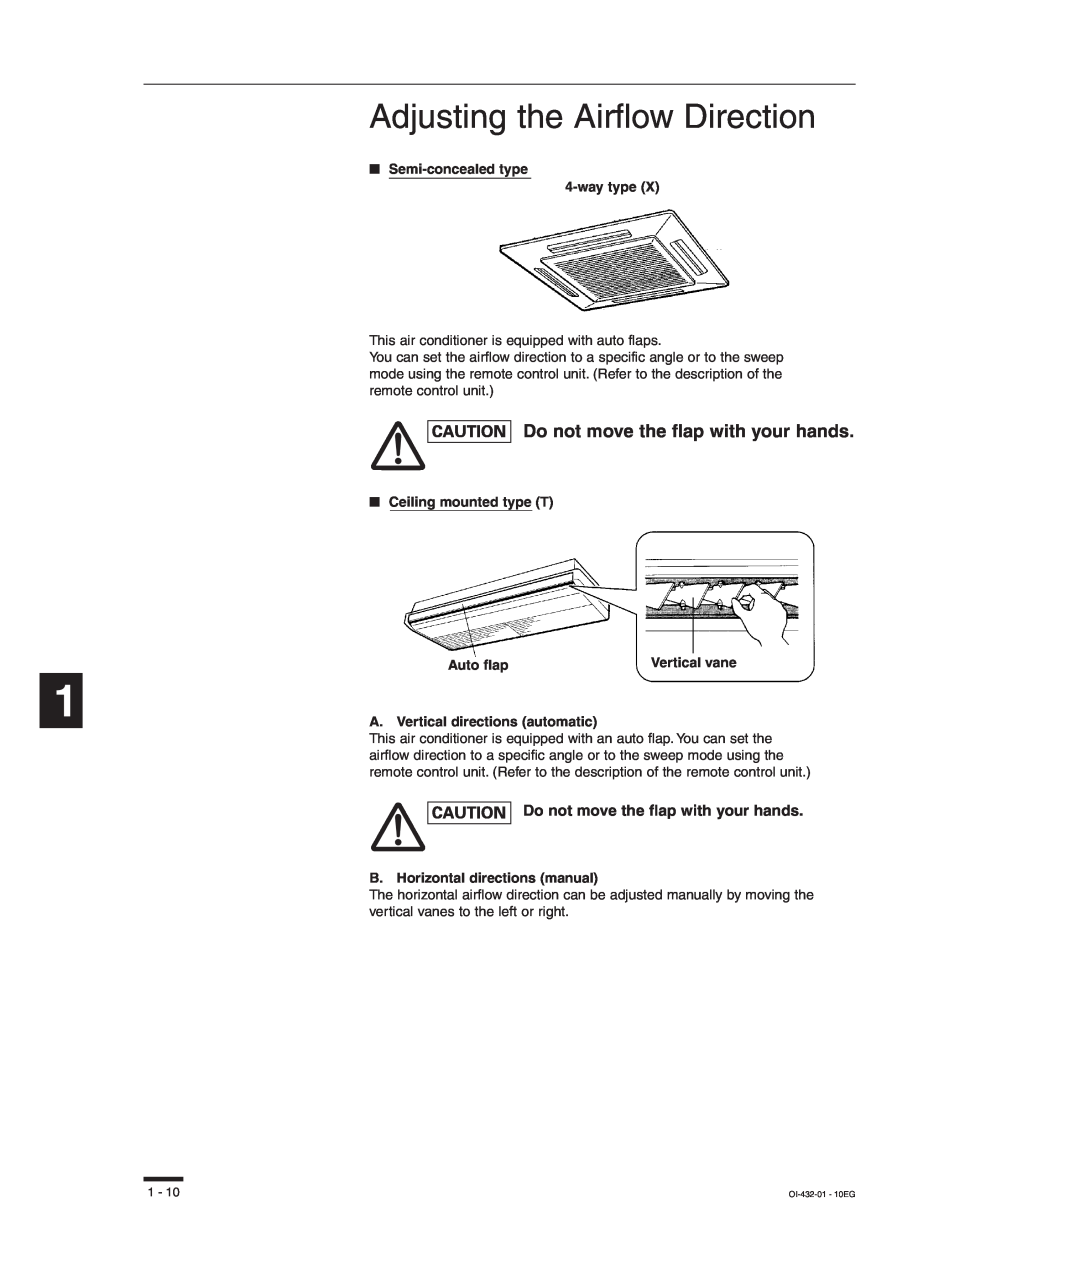 Sanyo TM-SH80UG, SHA-KC64UG, RCS-SH80UG, RCS-SH80UA Adjusting the Airflow Direction, Do not move the flap with your hands 